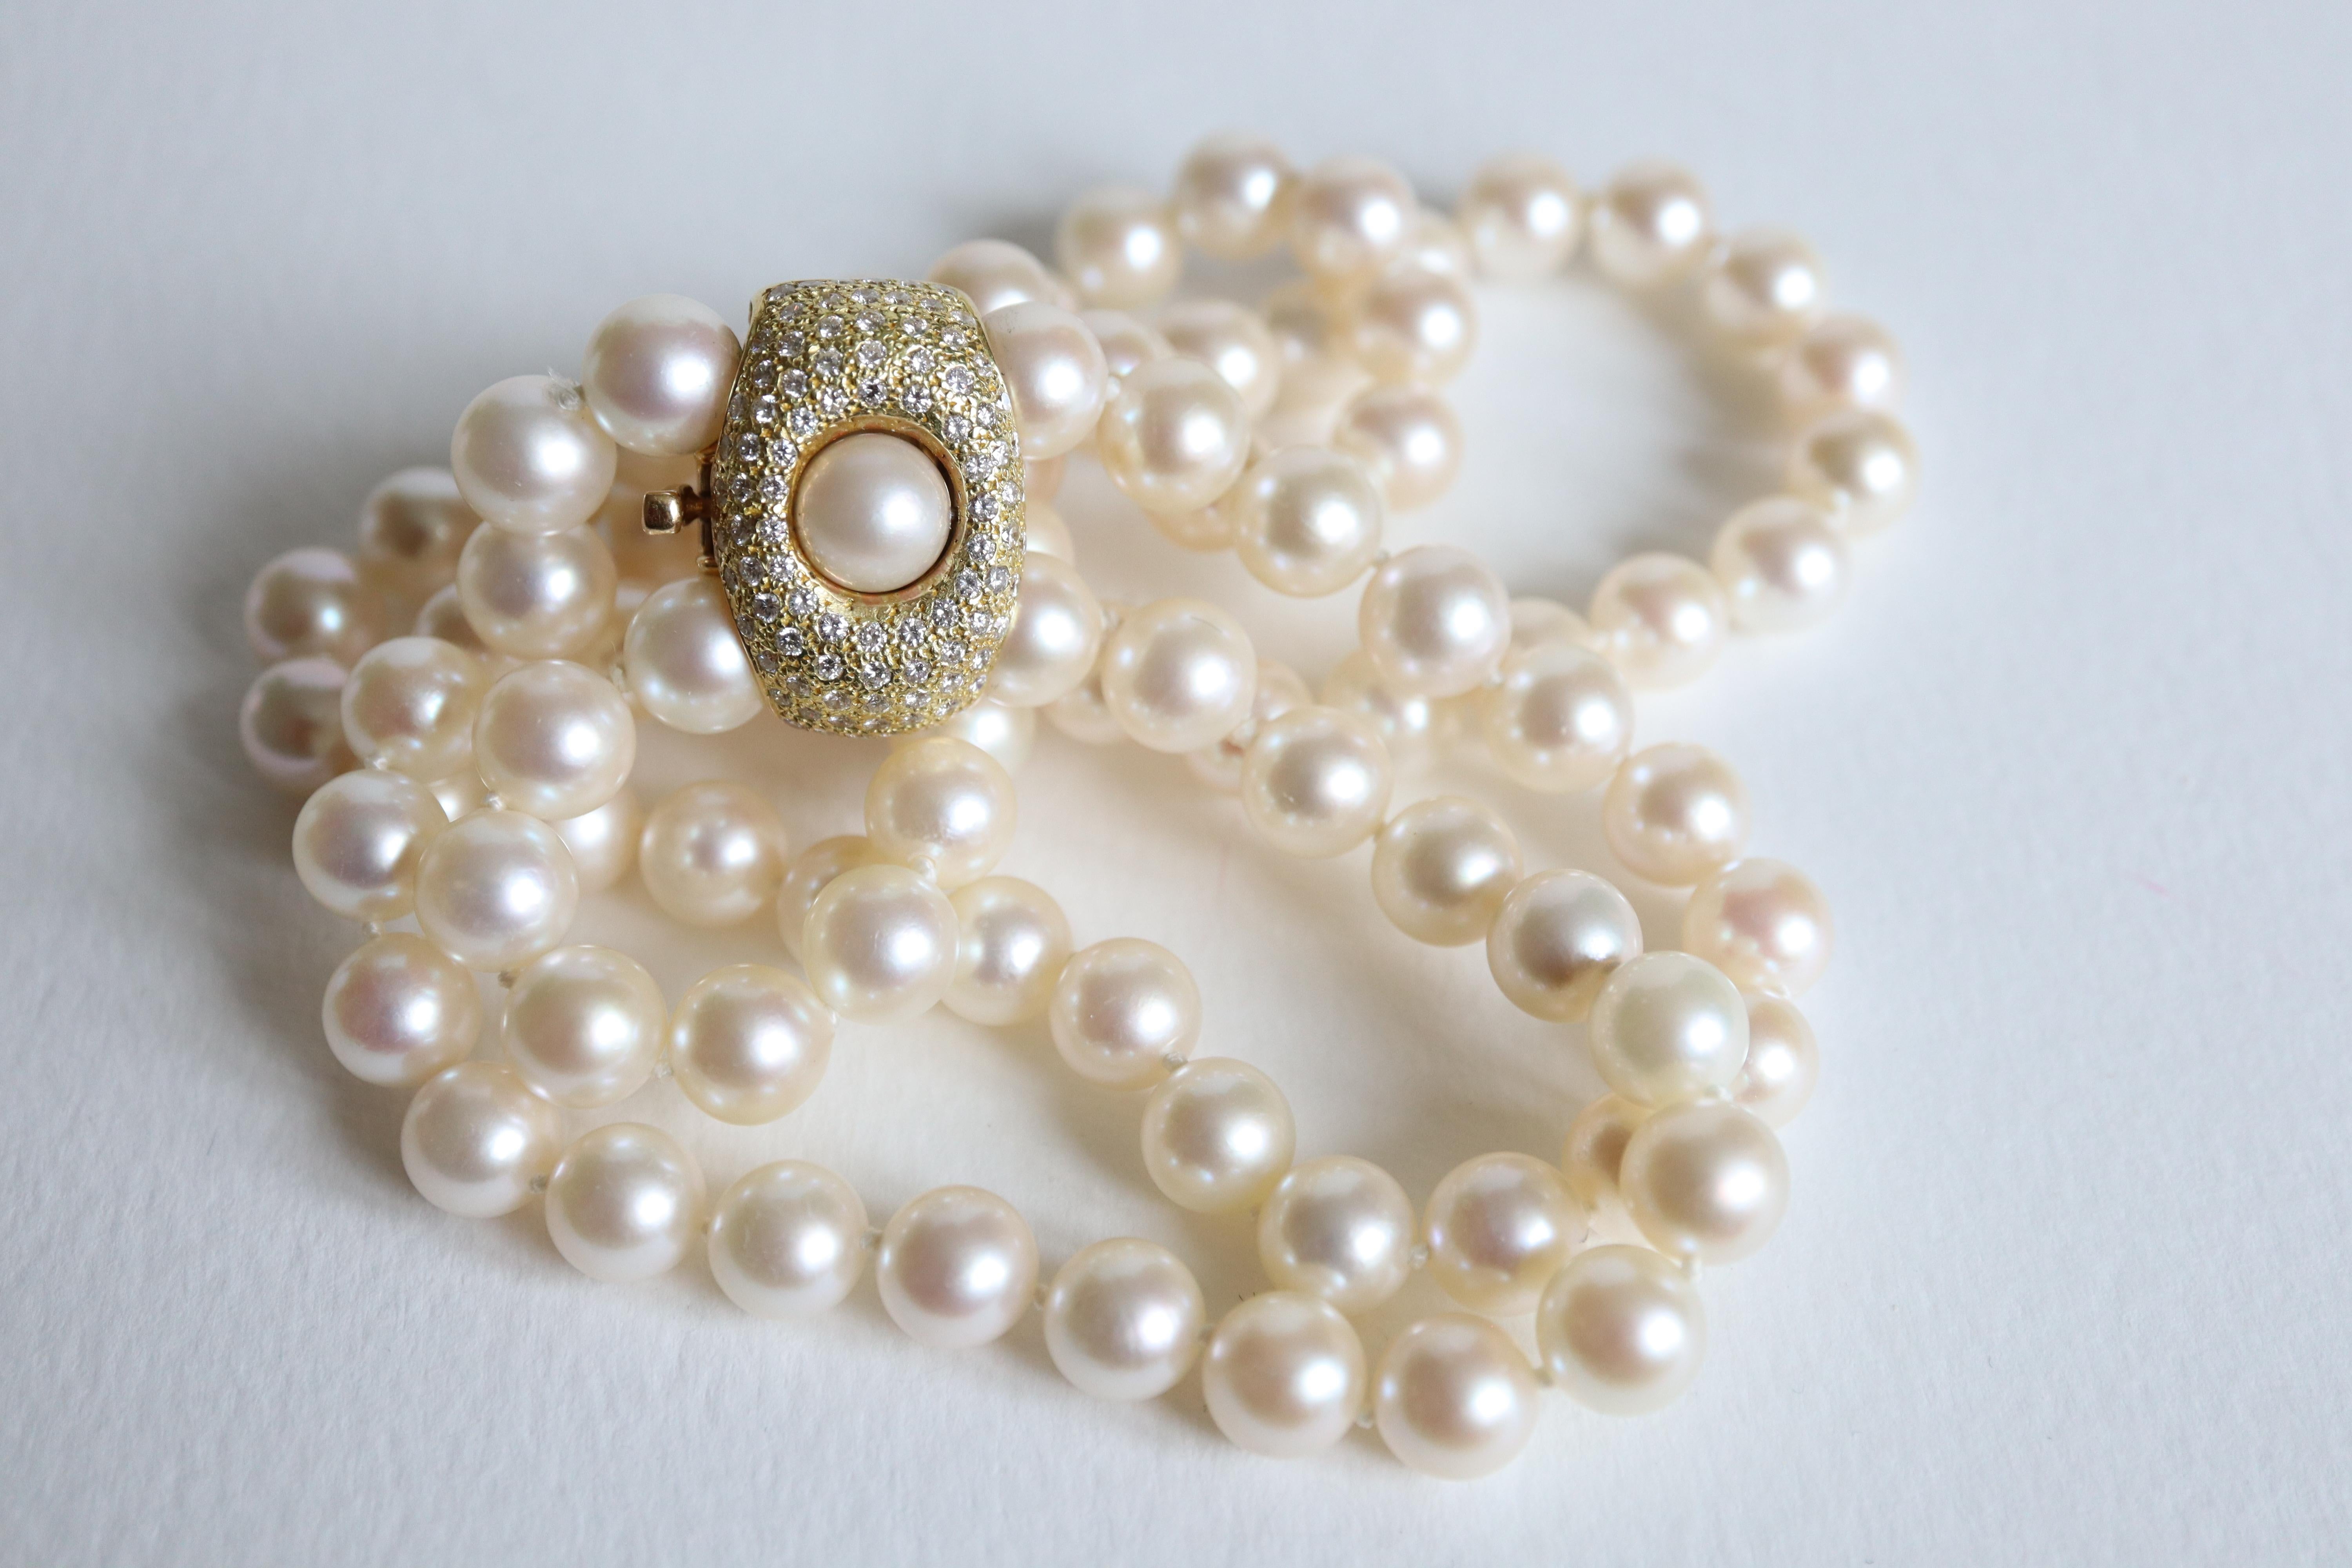 Necklace Two Rows of Pearls with 18 Carat Yellow Gold Clasp For Sale 2